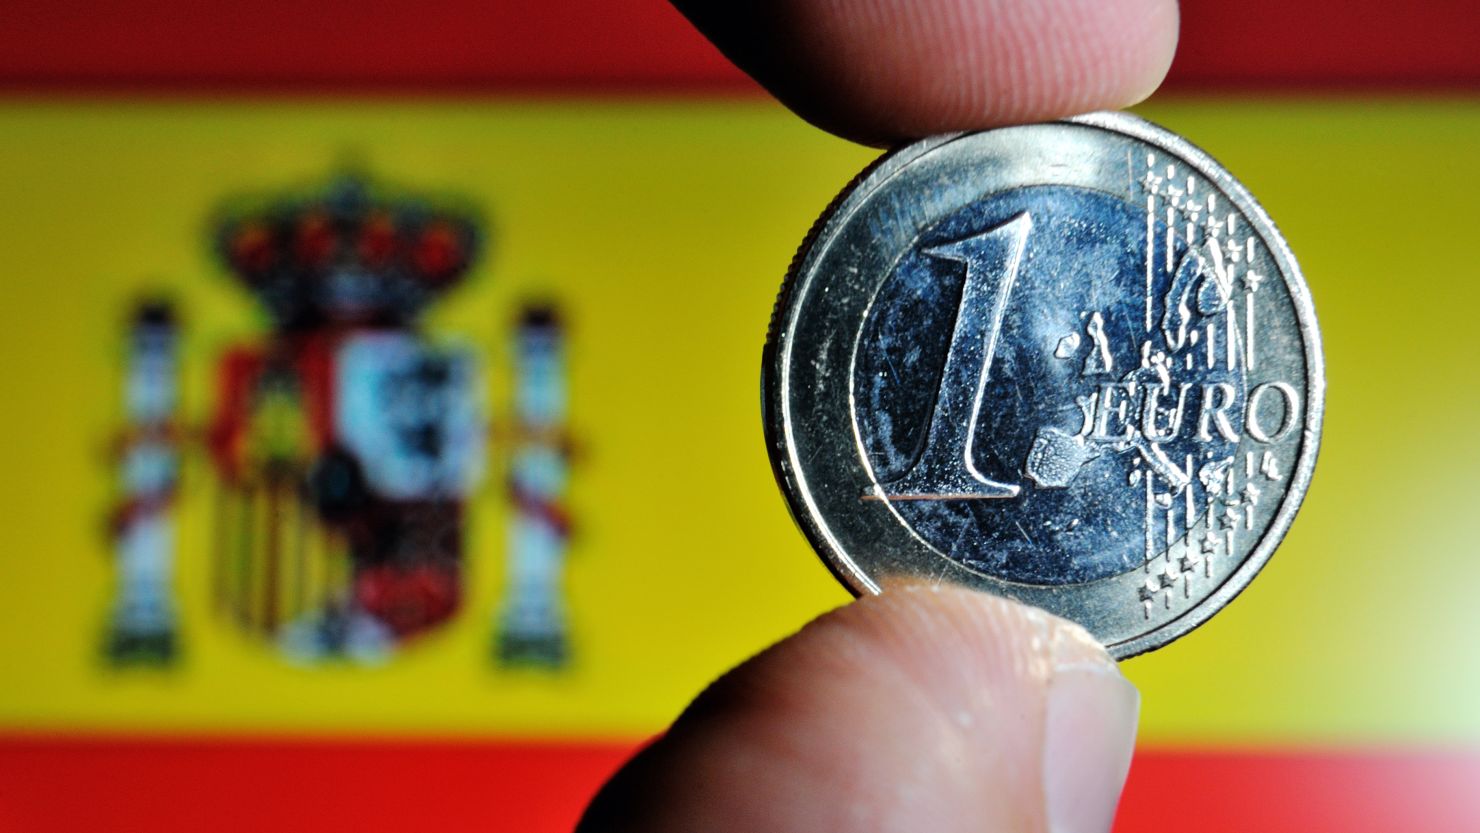 Euro coin and Spanish flag